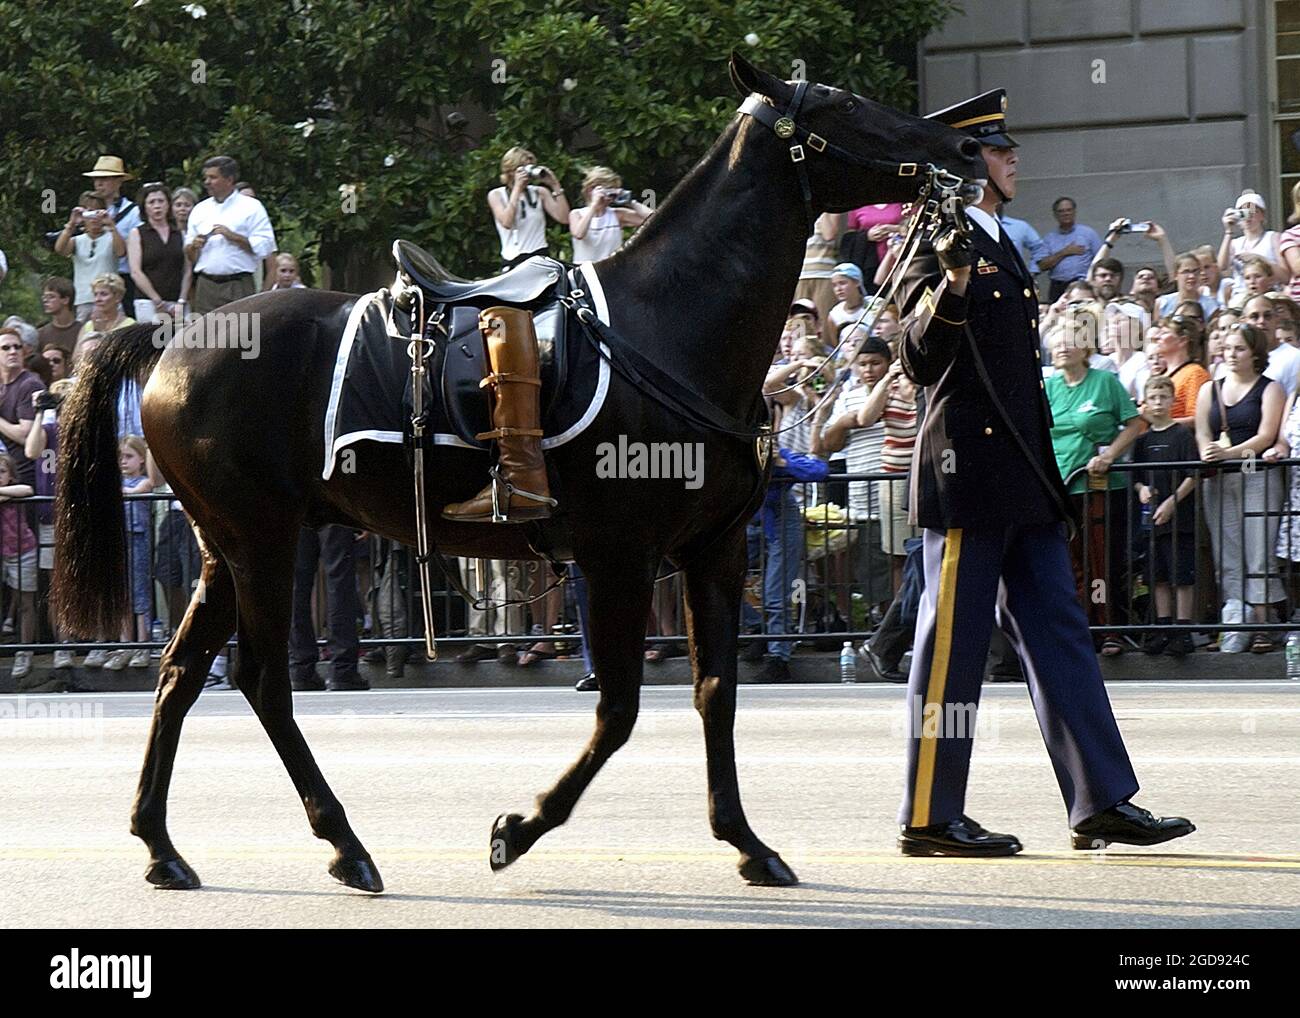 A US Army (USA) Soldier assigned to the 3rd Infantry Regiment Old Guard, leads a riderless horse, with the riding boots of Former US President Ronald Reagan, turned backwards, (a sign of a fallen leader), during the former president's funeral procession down Constitution Avenue, in Washington, District of Columbia (DC).  (US NAVY PHOTO BY PH2 AARON PETERSON 040609-N-5471P-013) Stock Photo